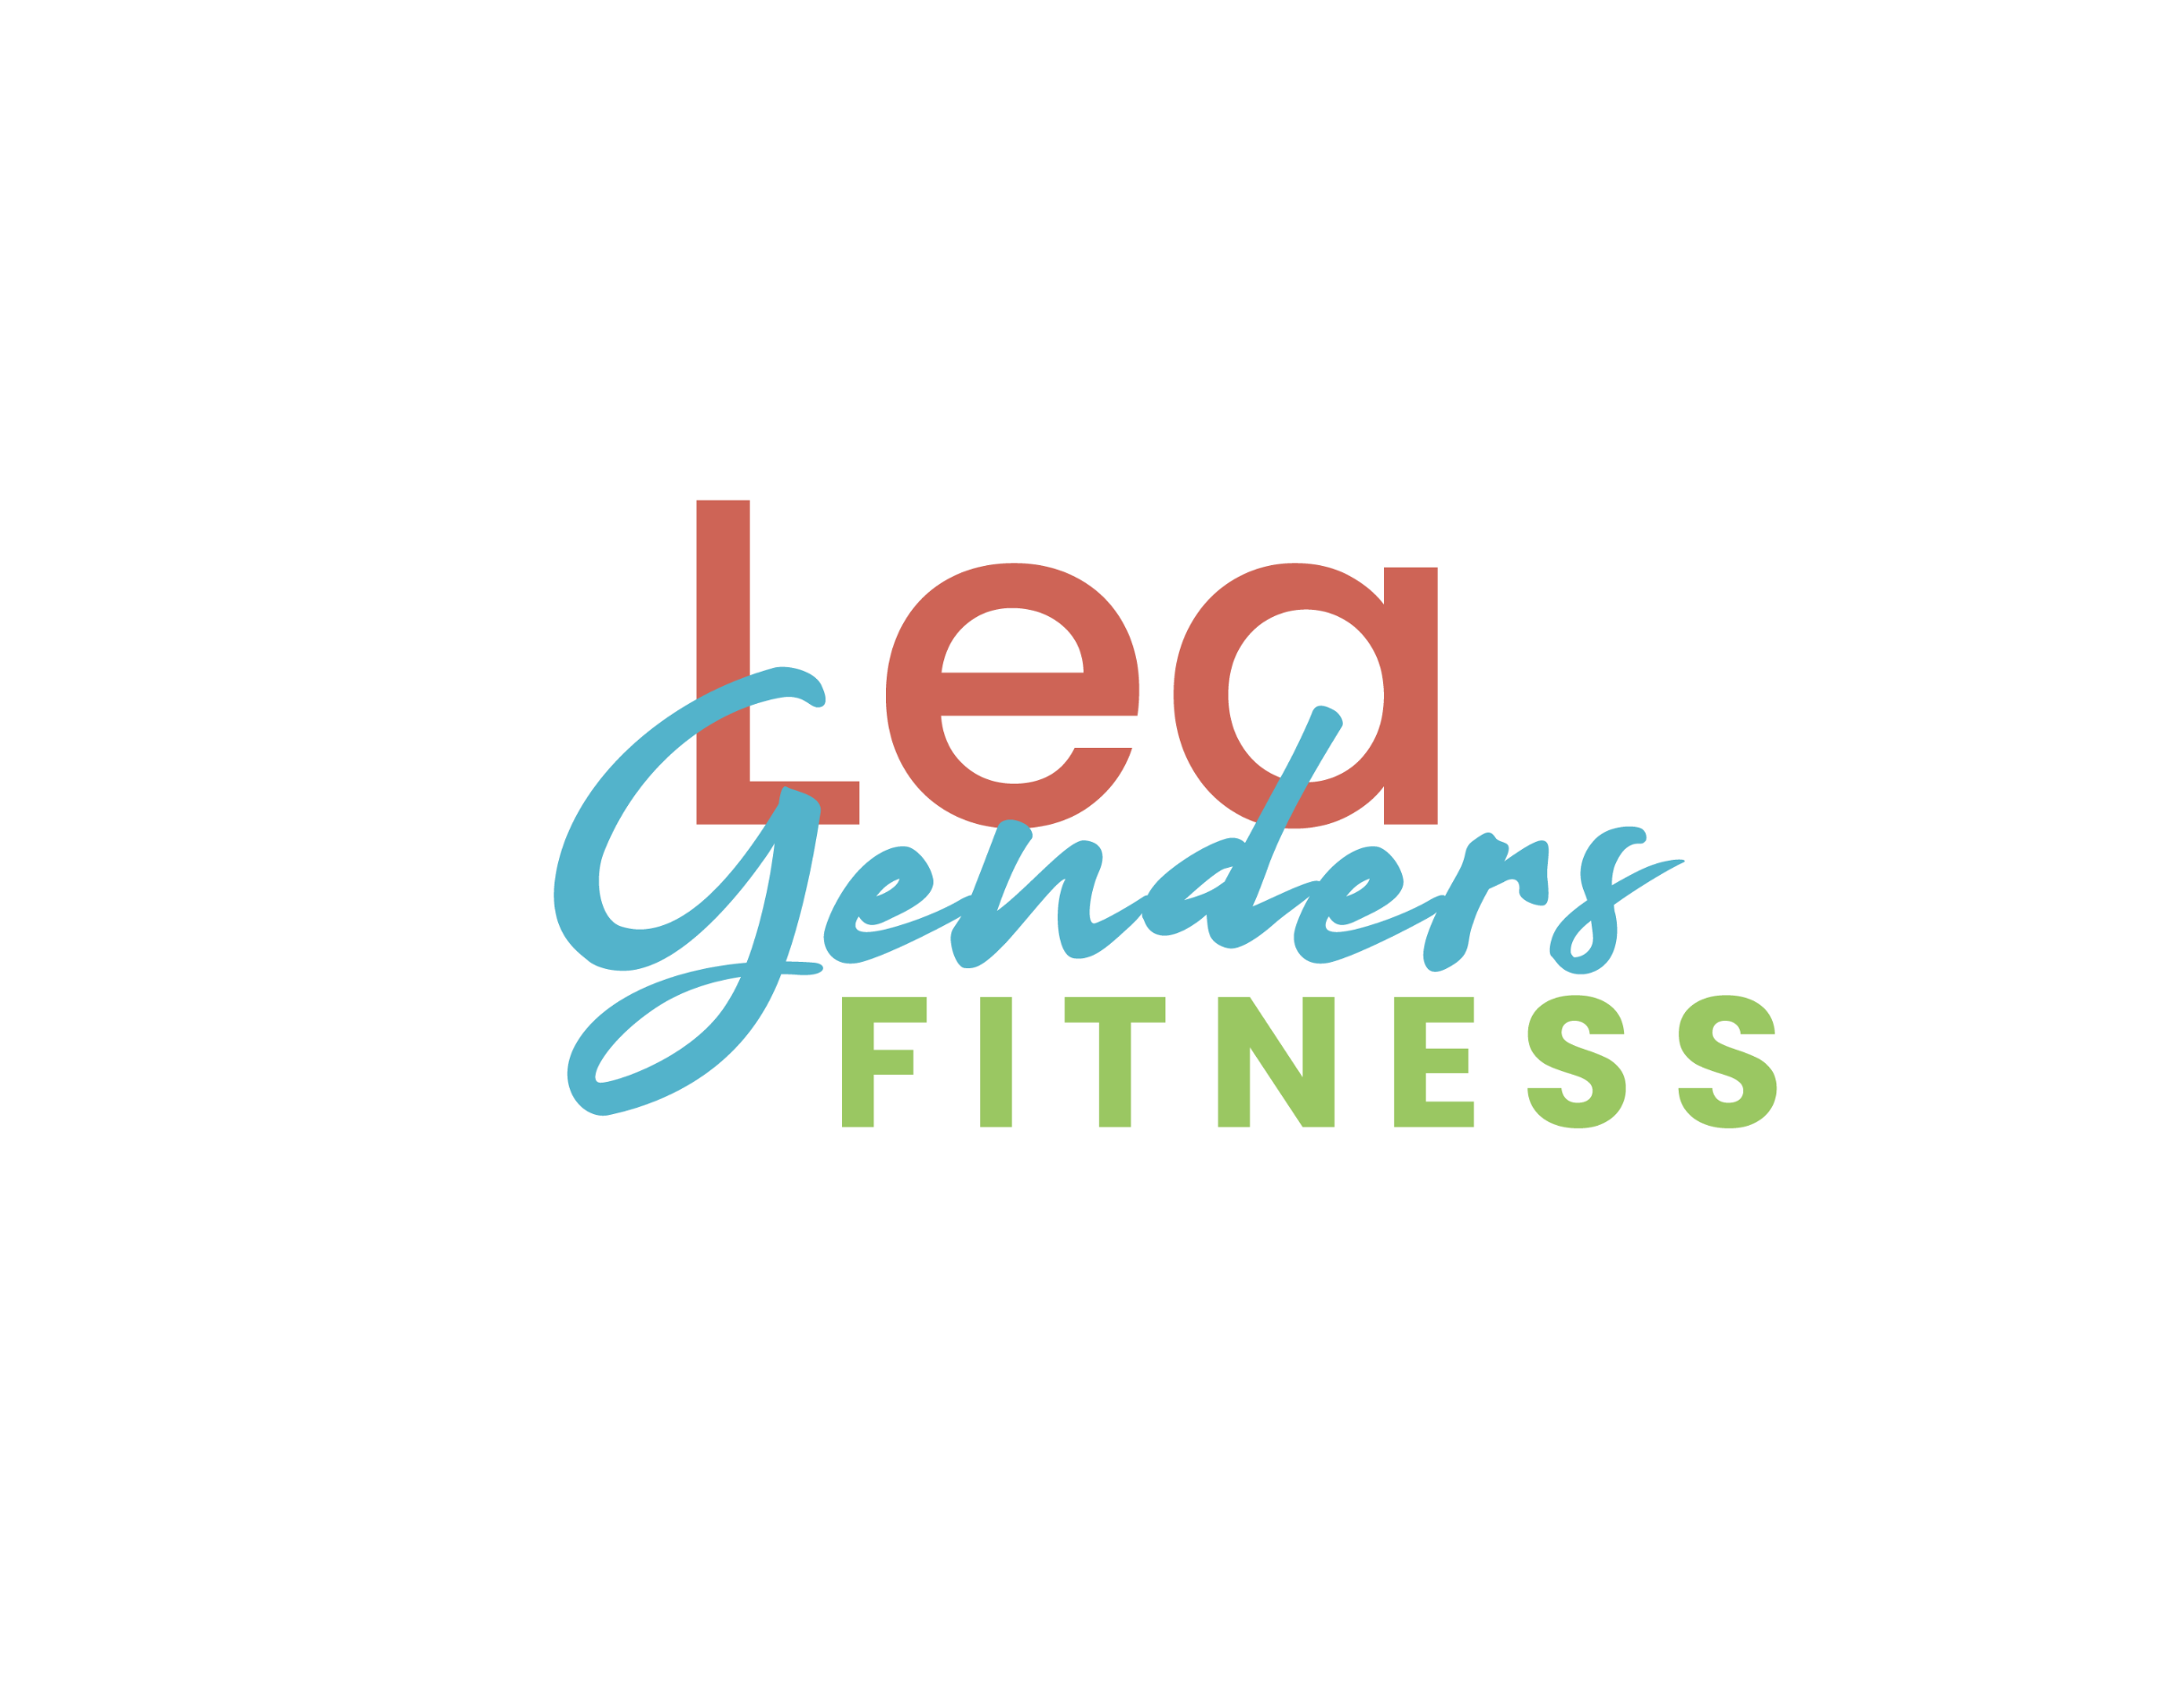 Run Faster and Stronger - Lea Genders Fitness